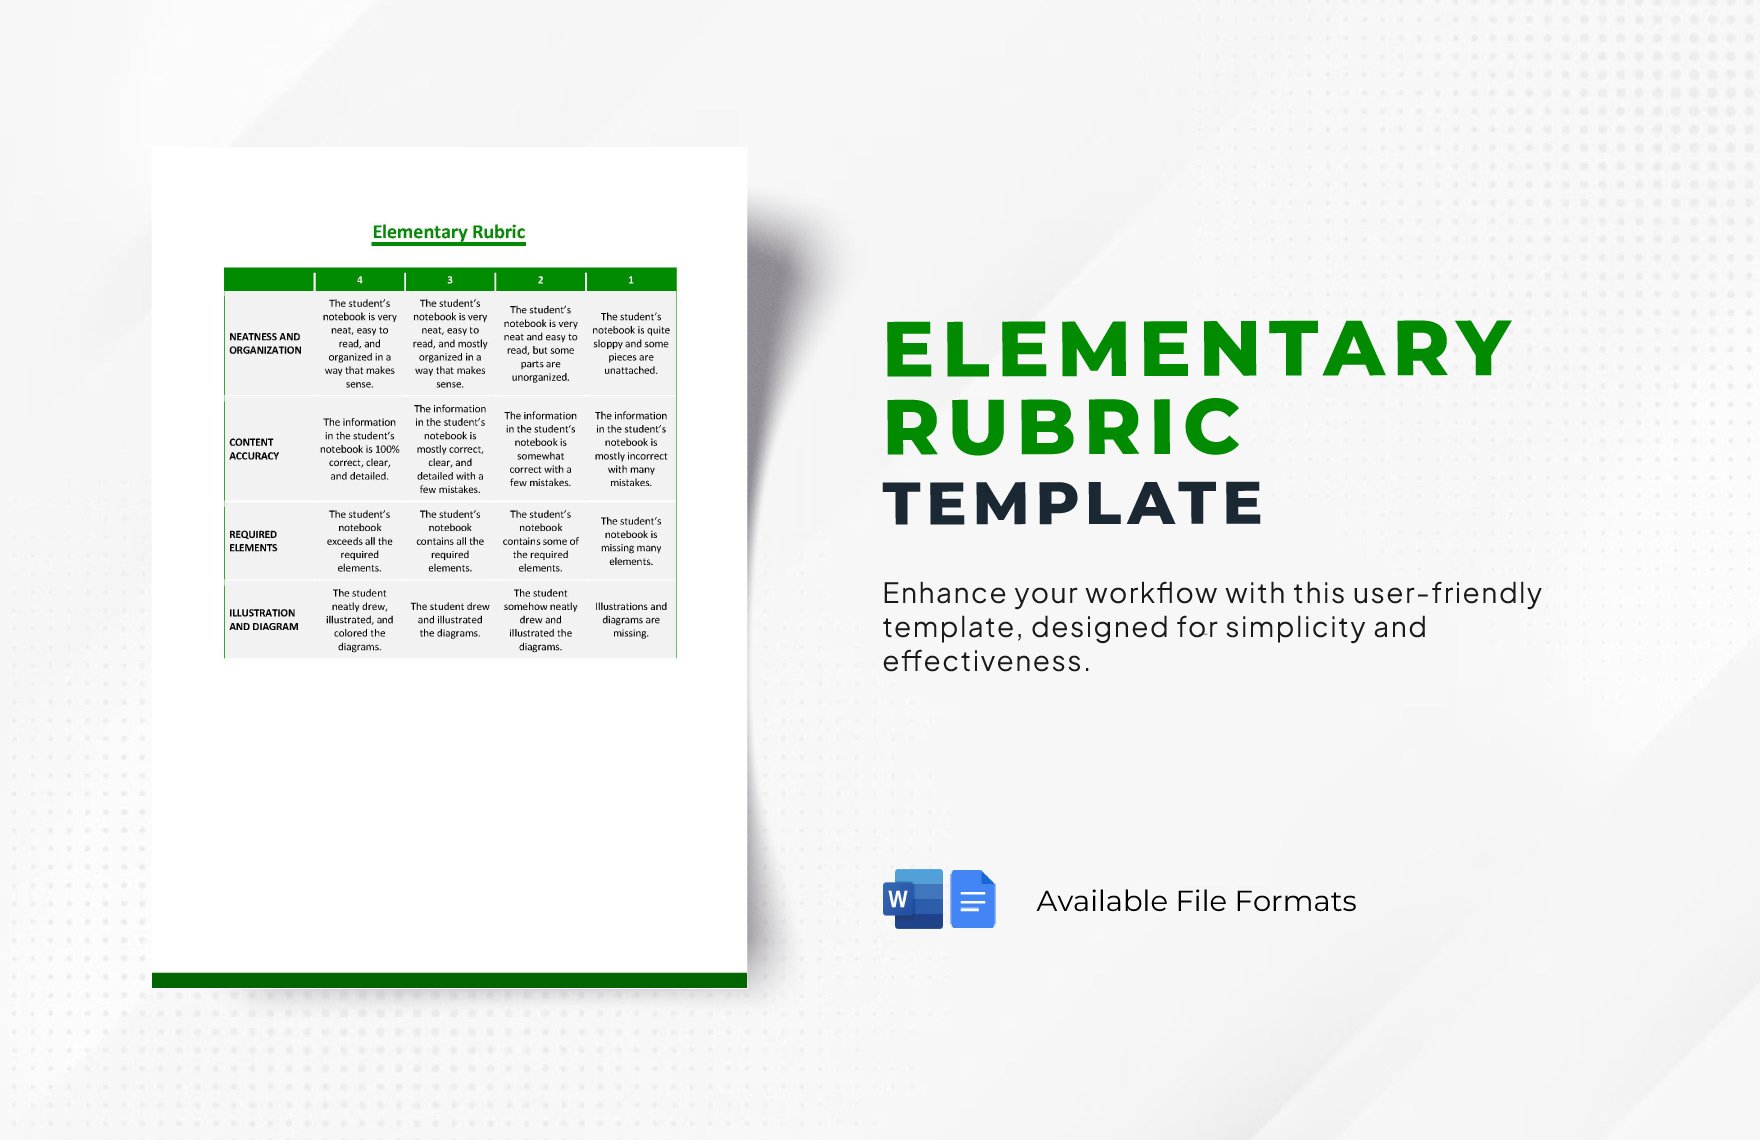 Free Elementary Rubric Template in Word, Google Docs